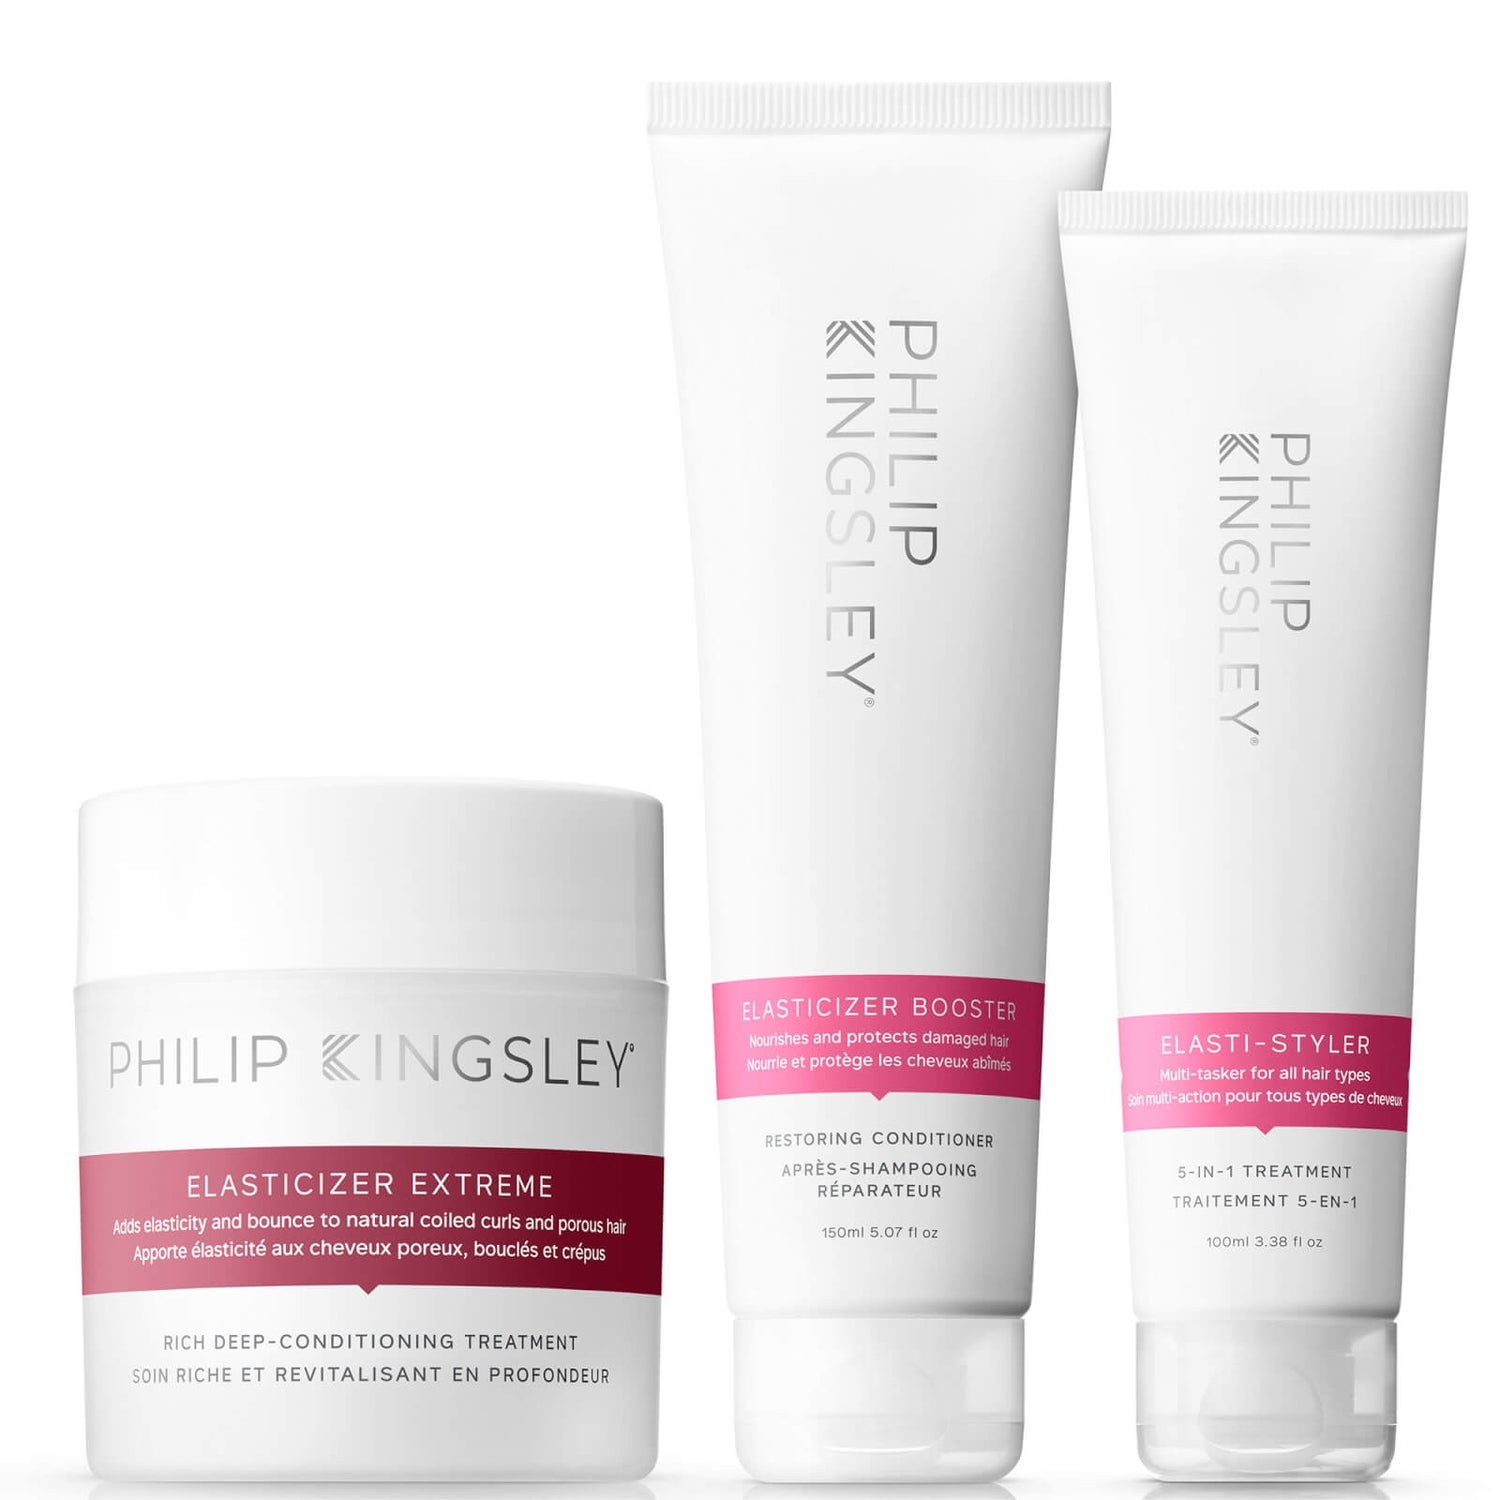 Philip Kingsley Elastic Fantastic Extreme Bestsellers Collection (Worth £94.00)